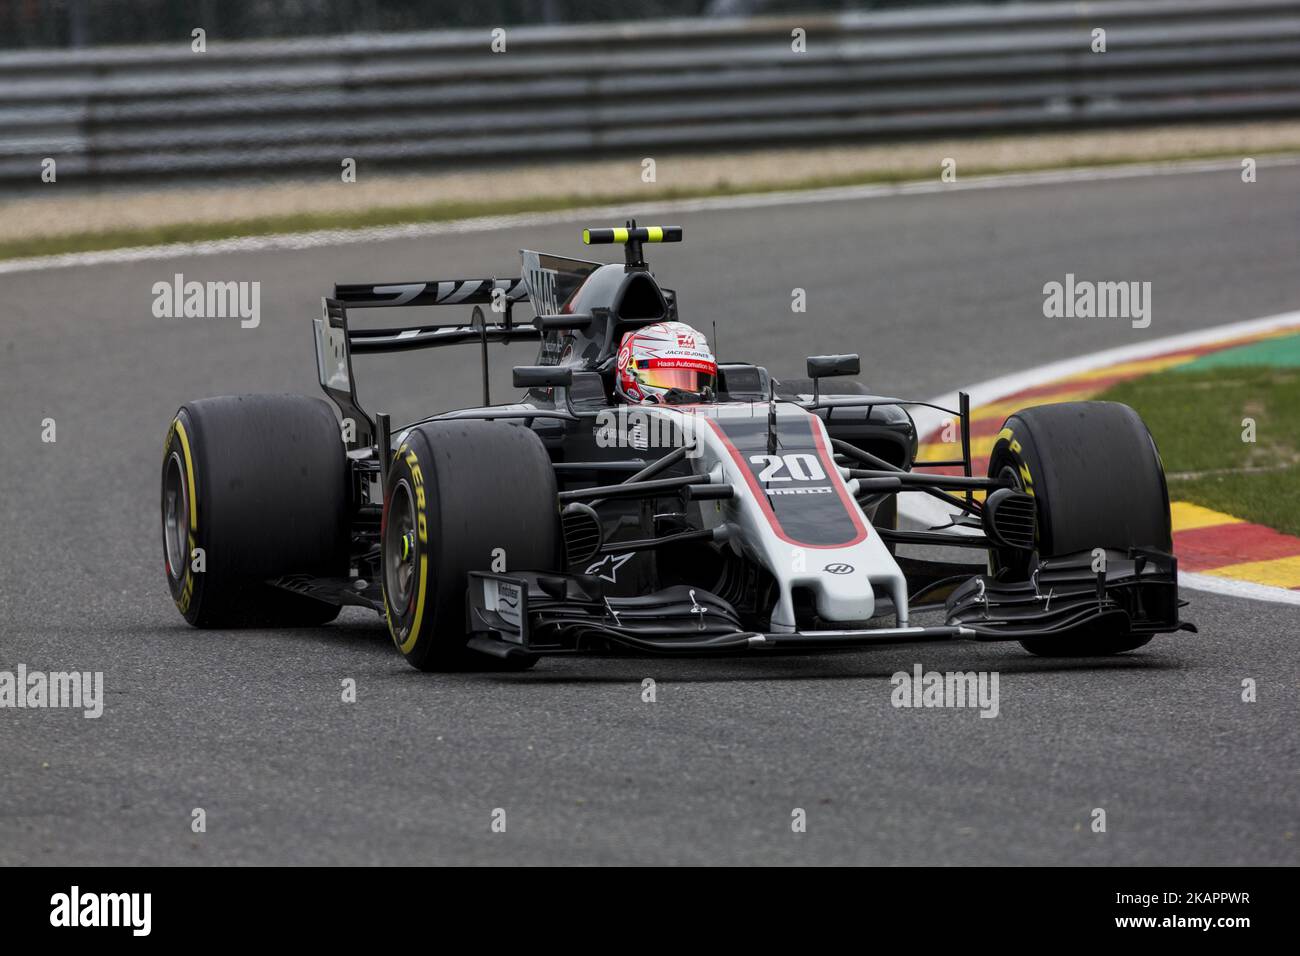 20 MAGNUSSEN Kevin from Denmark of Haas F1 team during the Formula One Belgian Grand Prix at Circuit de Spa-Francorchamps on August 25, 2017 in Spa, Belgium. (Photo by Xavier Bonilla/NurPhoto) Stock Photo